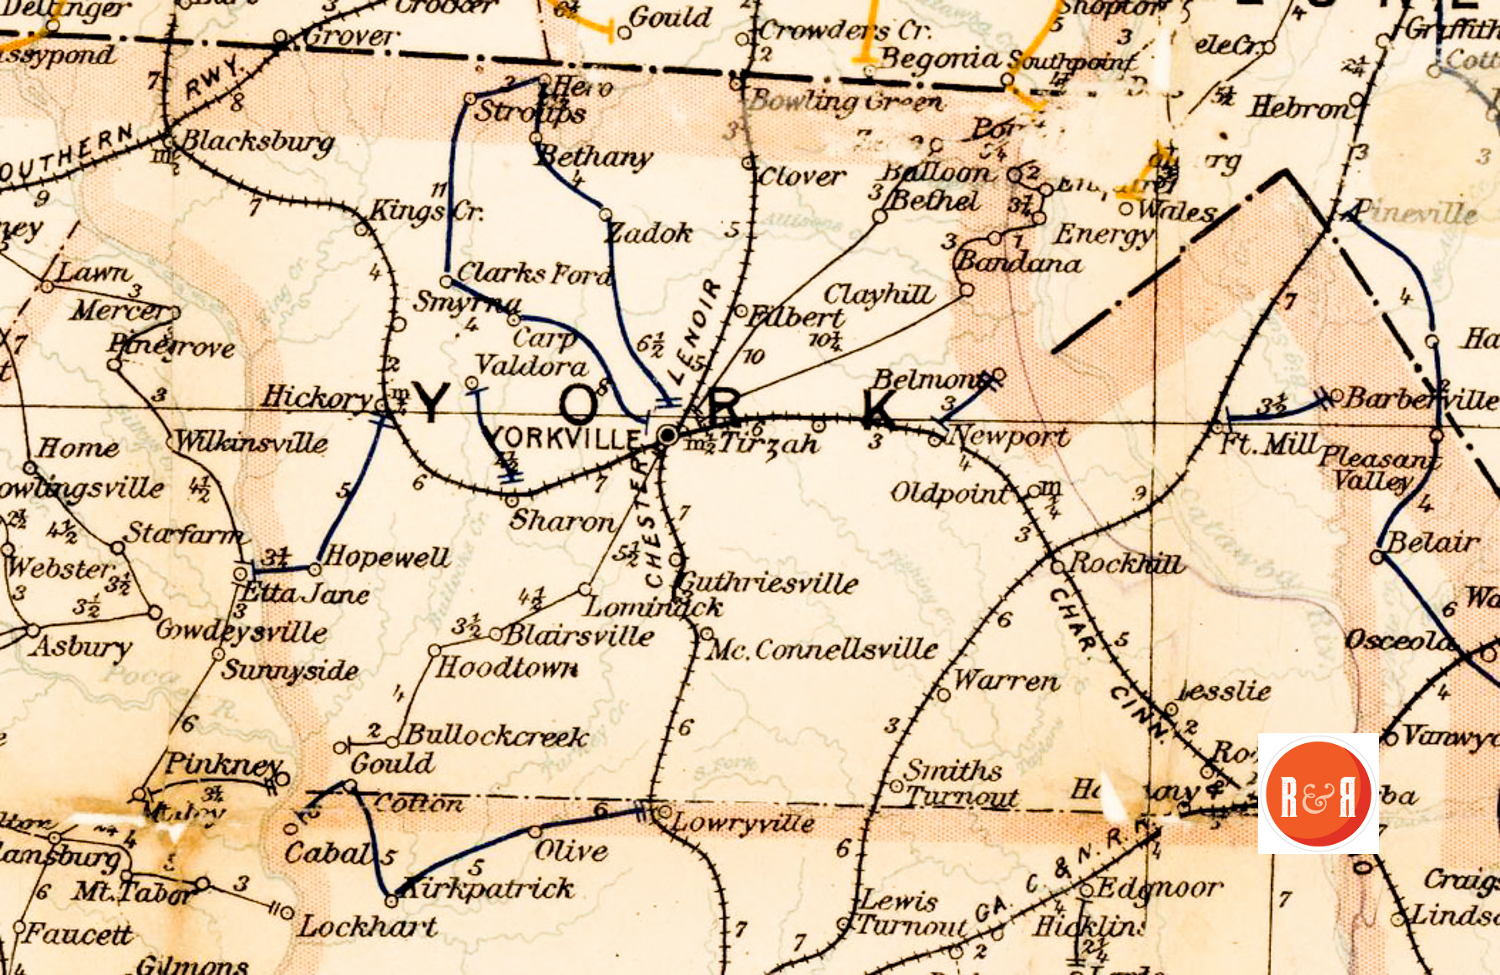 MAP OF AREA - 1896